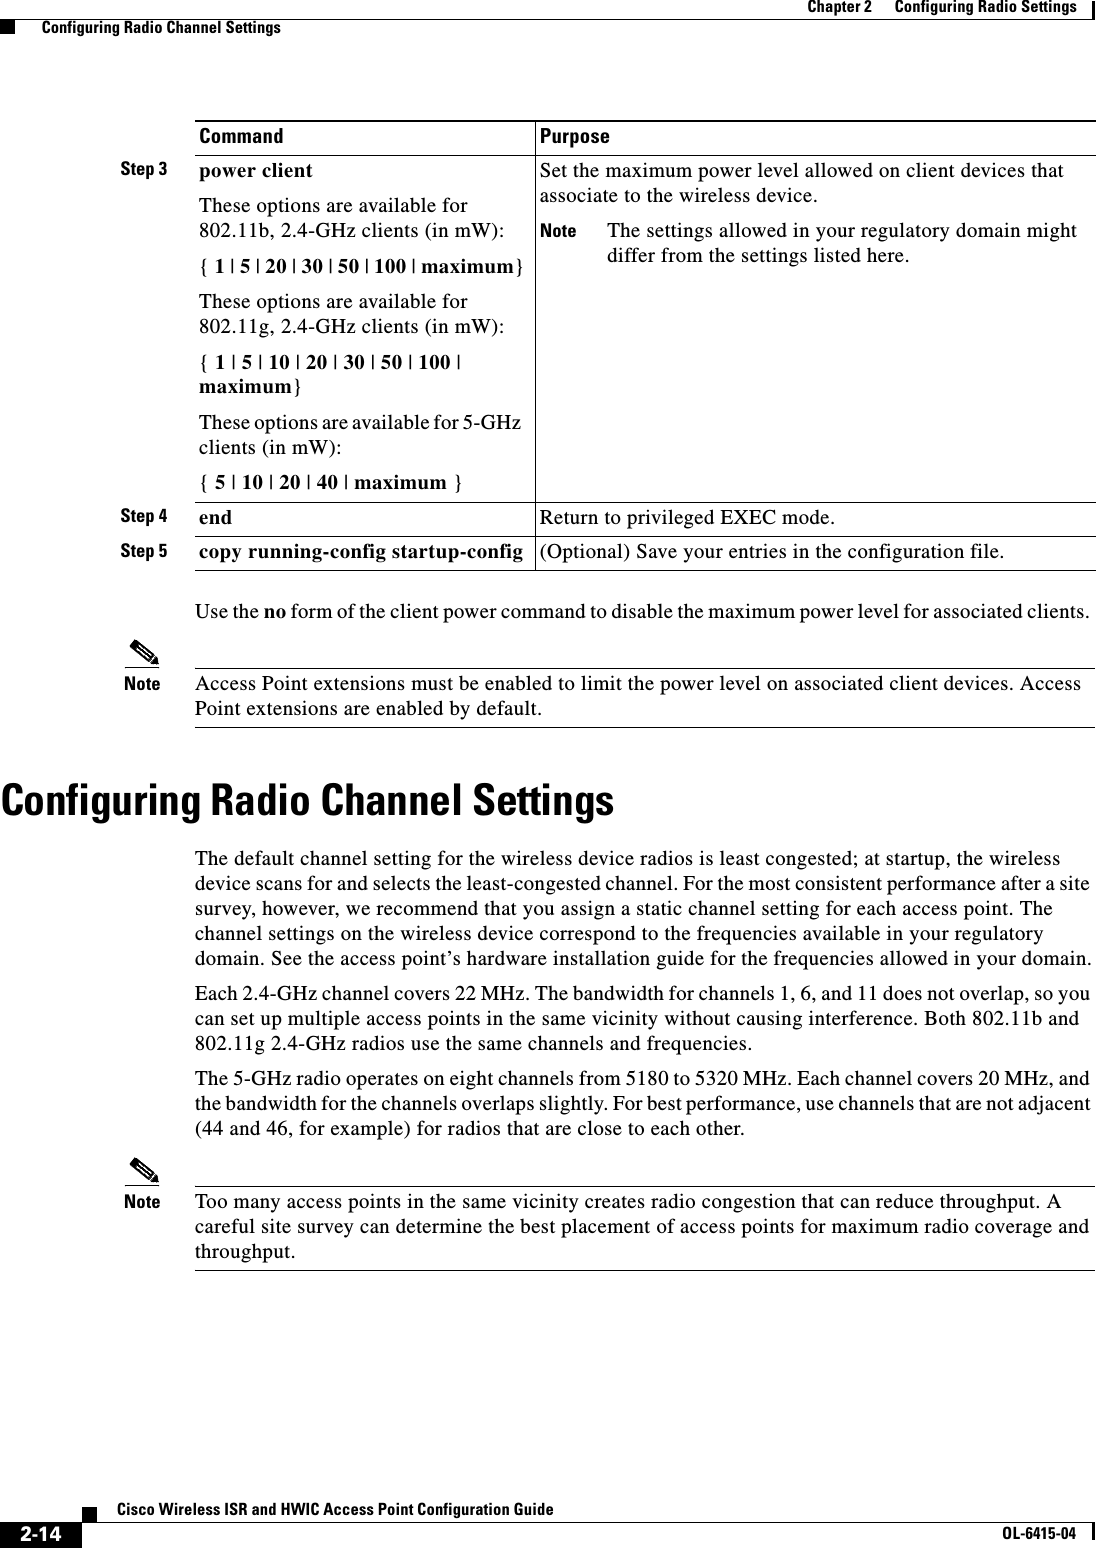  2-14Cisco Wireless ISR and HWIC Access Point Configuration GuideOL-6415-04Chapter 2      Configuring Radio Settings  Configuring Radio Channel SettingsUse the no form of the client power command to disable the maximum power level for associated clients. Note Access Point extensions must be enabled to limit the power level on associated client devices. Access Point extensions are enabled by default.Configuring Radio Channel SettingsThe default channel setting for the wireless device radios is least congested; at startup, the wireless device scans for and selects the least-congested channel. For the most consistent performance after a site survey, however, we recommend that you assign a static channel setting for each access point. The channel settings on the wireless device correspond to the frequencies available in your regulatory domain. See the access point’s hardware installation guide for the frequencies allowed in your domain.Each 2.4-GHz channel covers 22 MHz. The bandwidth for channels 1, 6, and 11 does not overlap, so you can set up multiple access points in the same vicinity without causing interference. Both 802.11b and 802.11g 2.4-GHz radios use the same channels and frequencies.The 5-GHz radio operates on eight channels from 5180 to 5320 MHz. Each channel covers 20 MHz, and the bandwidth for the channels overlaps slightly. For best performance, use channels that are not adjacent (44 and 46, for example) for radios that are close to each other.Note Too many access points in the same vicinity creates radio congestion that can reduce throughput. A careful site survey can determine the best placement of access points for maximum radio coverage and throughput. Step 3 power clientThese options are available for 802.11b, 2.4-GHz clients (in mW): { 1 | 5 | 20 | 30 | 50 | 100 | maximum}These options are available for 802.11g, 2.4-GHz clients (in mW): { 1 | 5 | 10 | 20 | 30 | 50 | 100 | maximum}These options are available for 5-GHz clients (in mW):{ 5 | 10 | 20 | 40 | maximum }Set the maximum power level allowed on client devices that associate to the wireless device.Note The settings allowed in your regulatory domain might differ from the settings listed here.Step 4 end Return to privileged EXEC mode.Step 5 copy running-config startup-config (Optional) Save your entries in the configuration file.Command Purpose